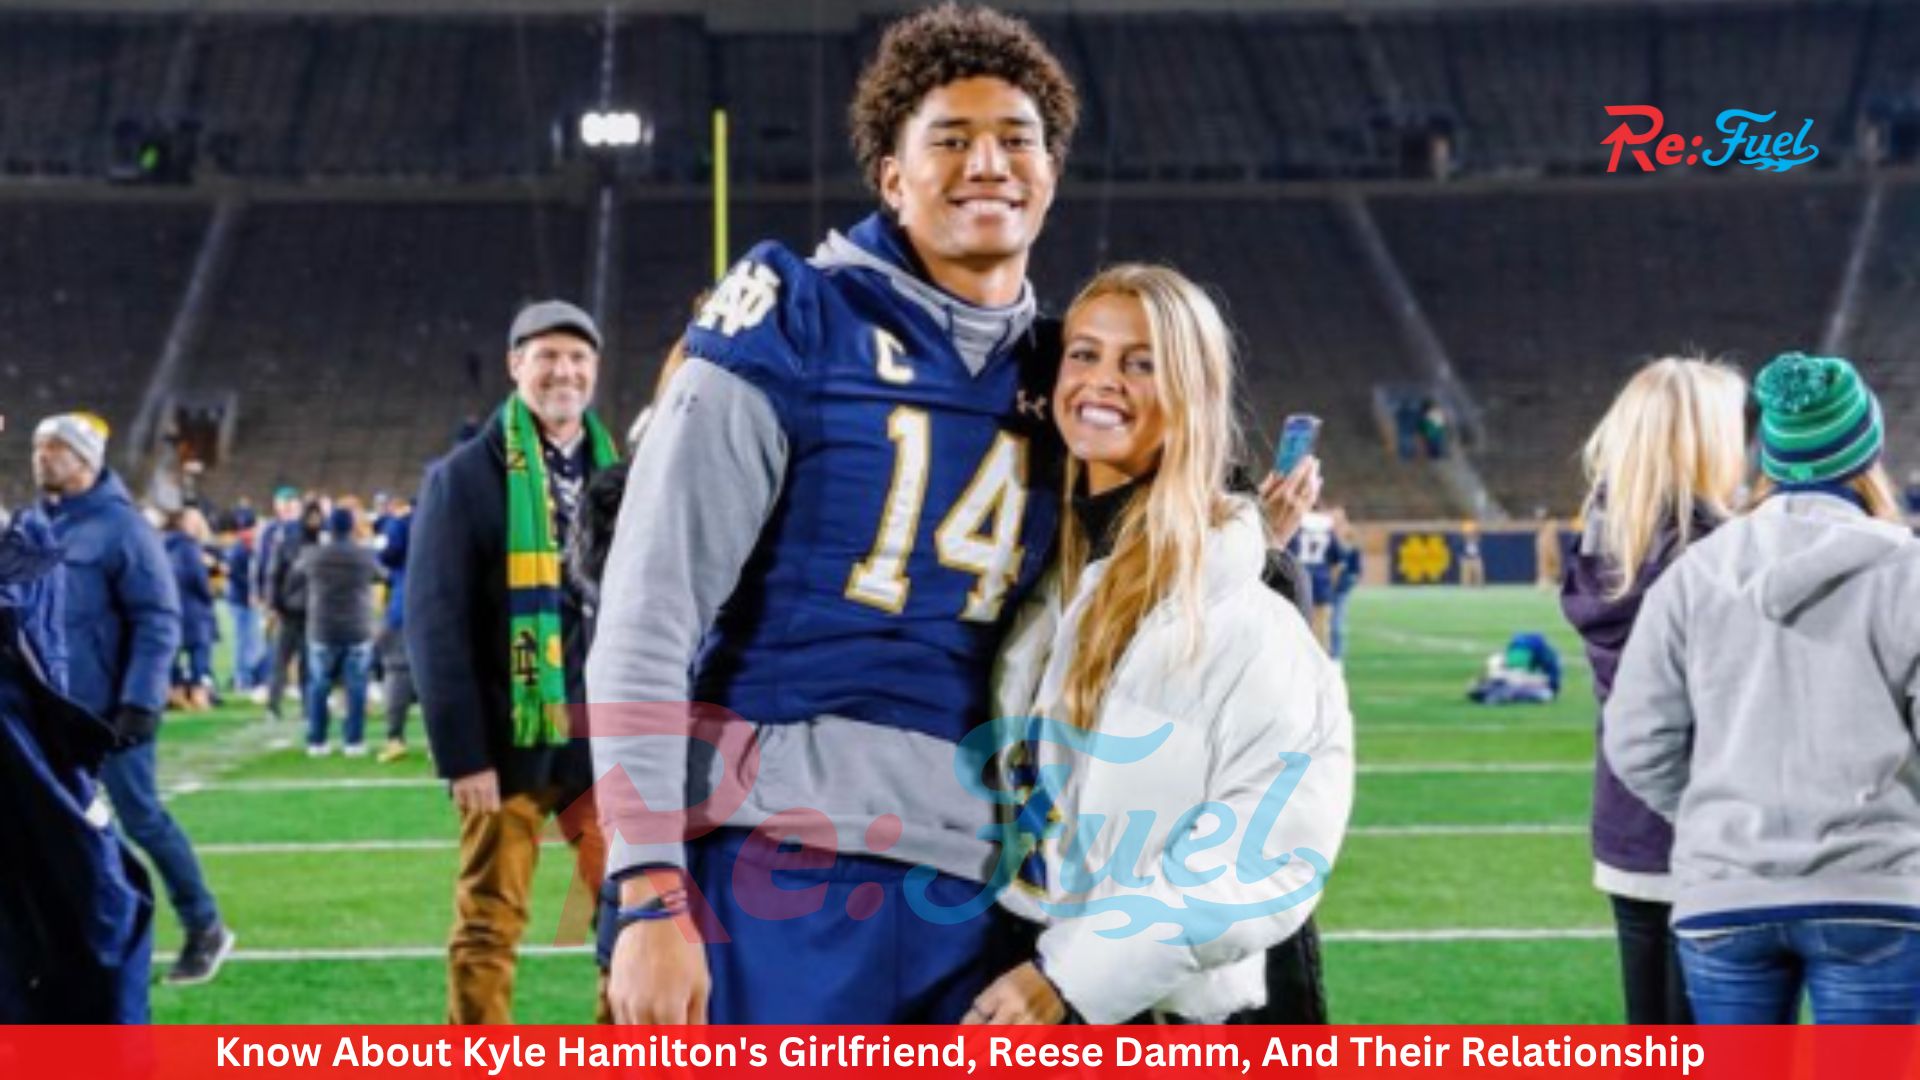 Know About Kyle Hamilton's Girlfriend, Reese Damm, And Their Relationship